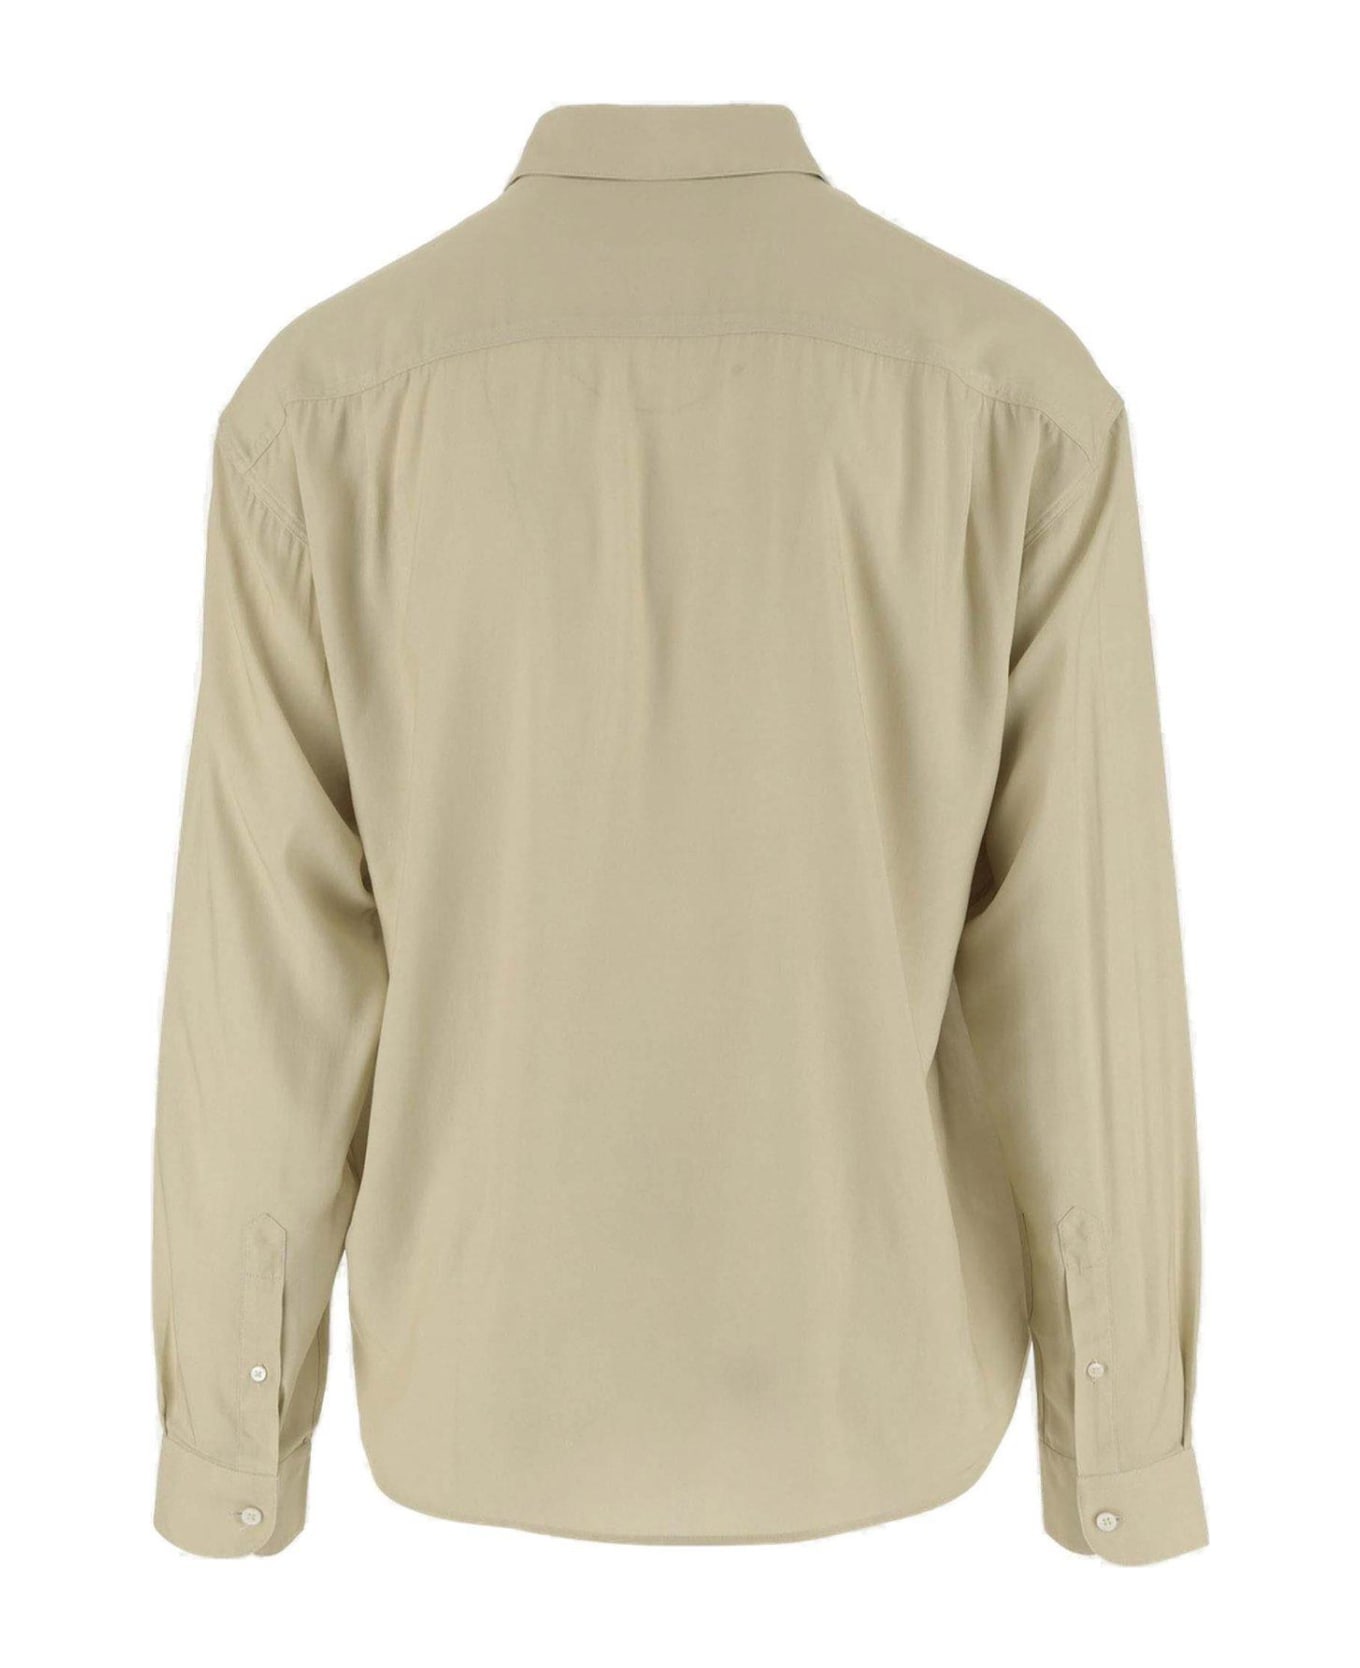 Jacquemus The Bathers Long-sleeve Shirt - MULTICOLOR